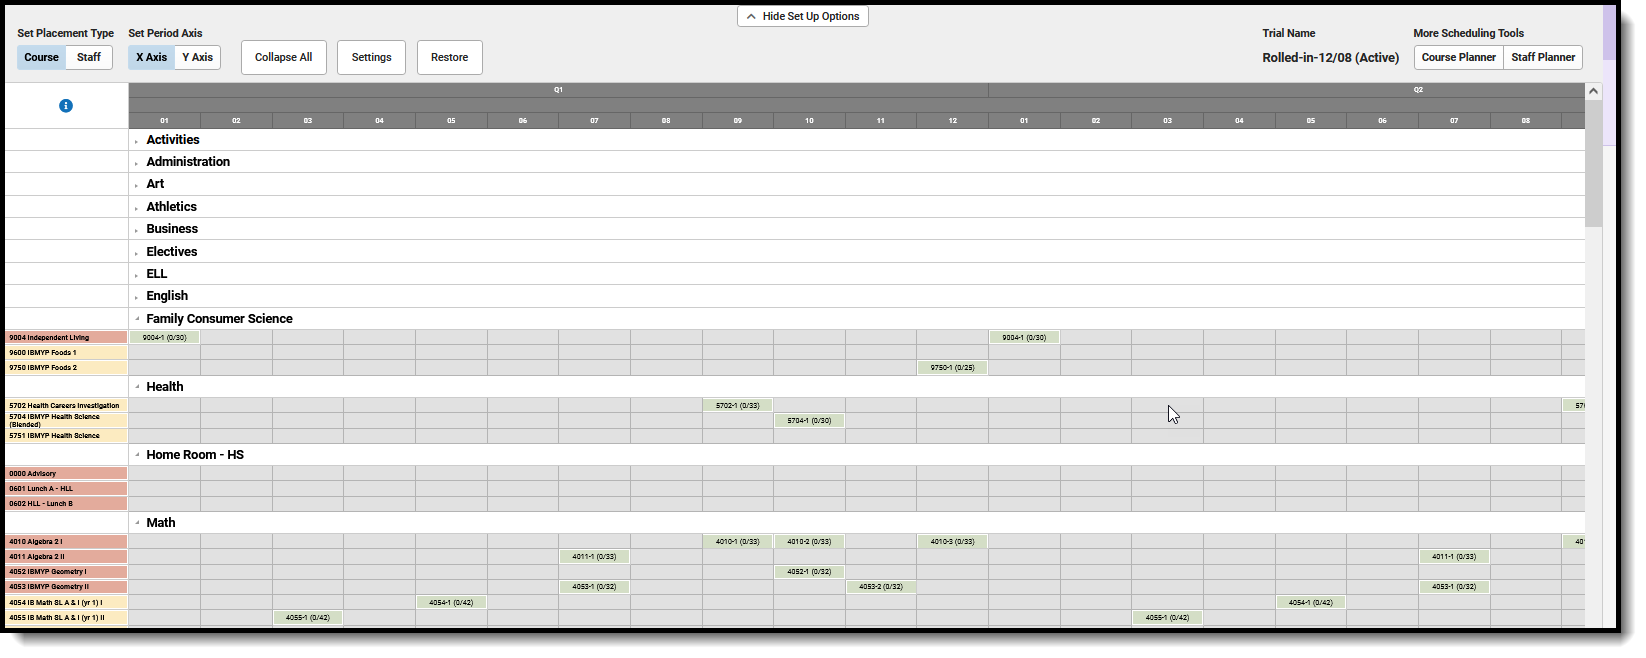 Screenshot of the Full Screen view of the Scheduling Board